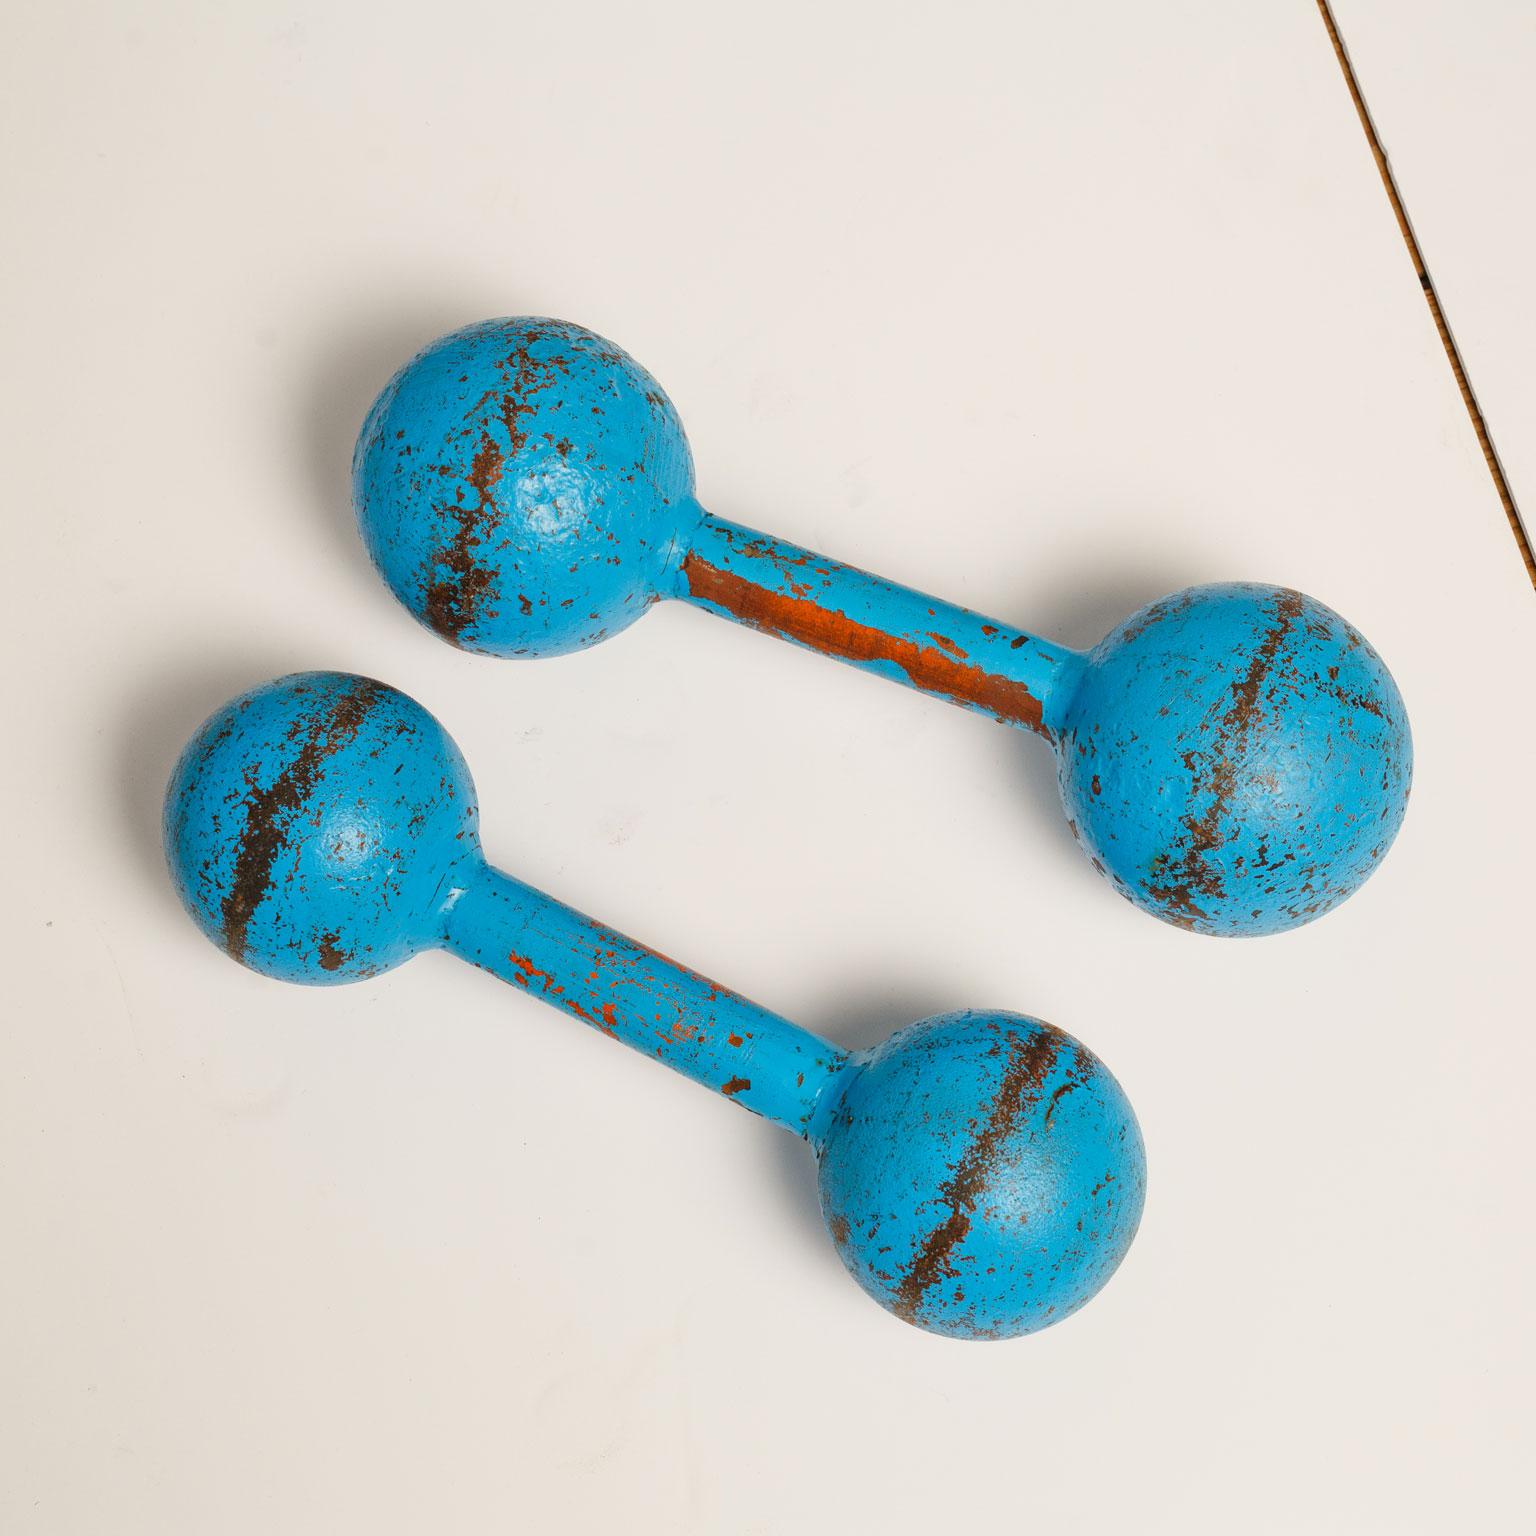 Pair of vintage iron barbells painted in cyan, or cerulean, blue. Hand-hammered with slight variations in size and proportion. Wonderfully decorative. Sold together as a pair for $550 (second similar pair also available).

First barbell measures